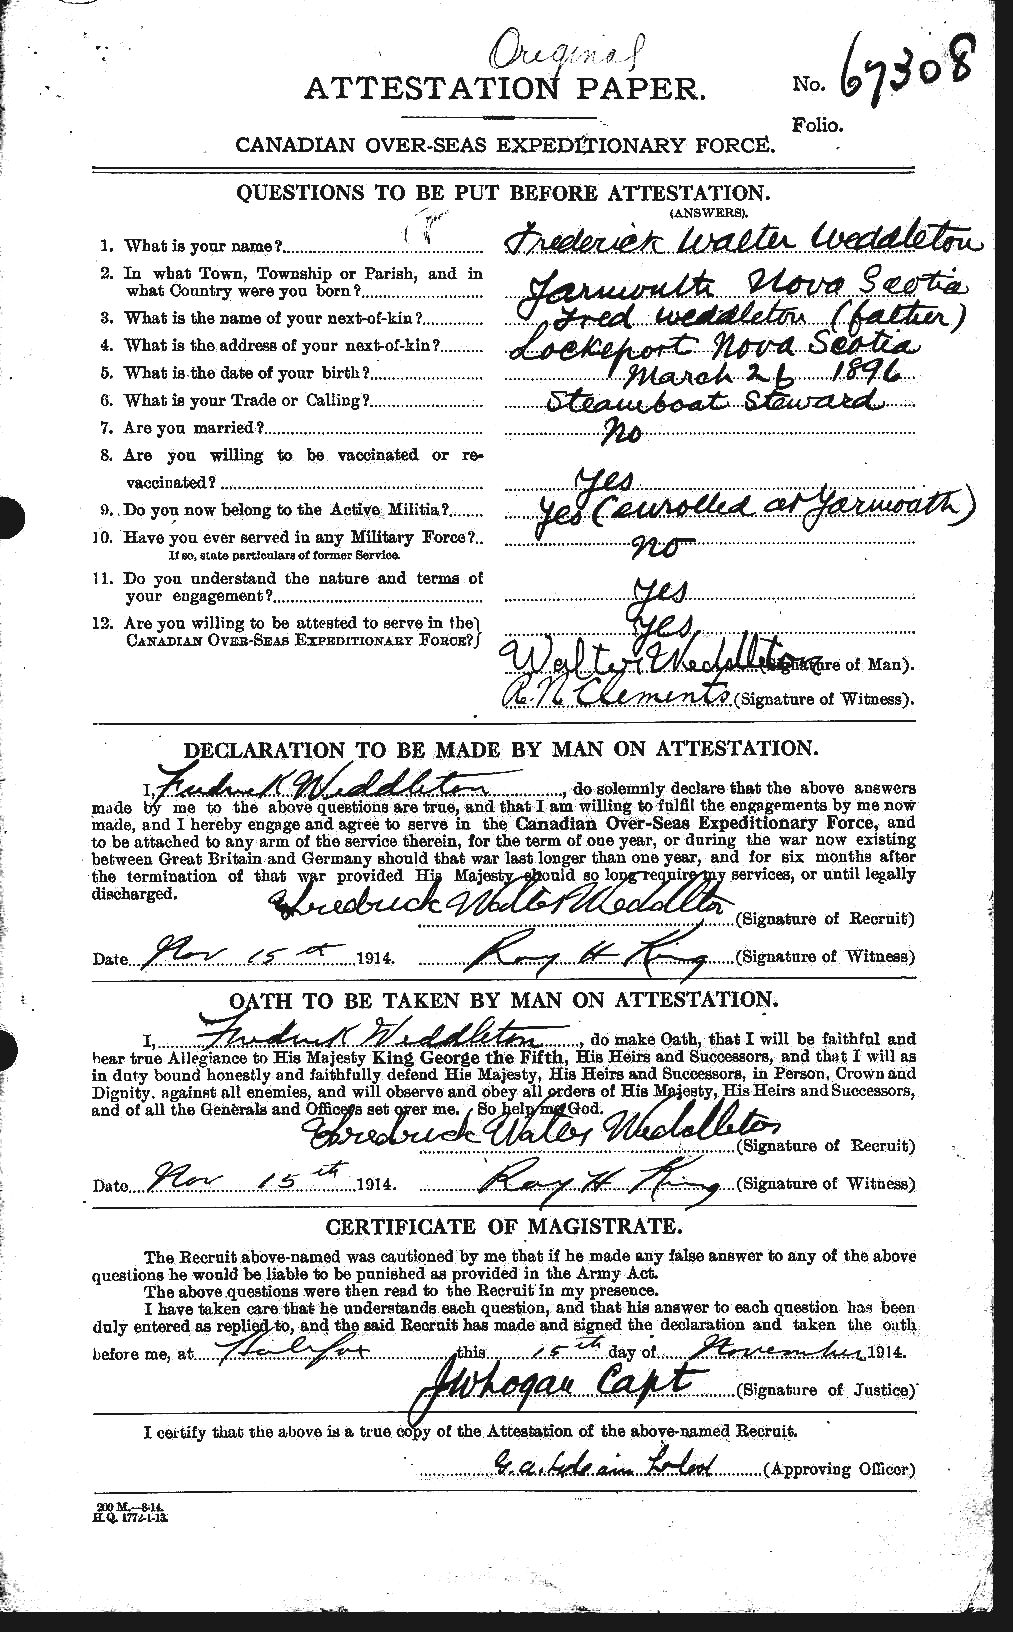 Personnel Records of the First World War - CEF 662073a